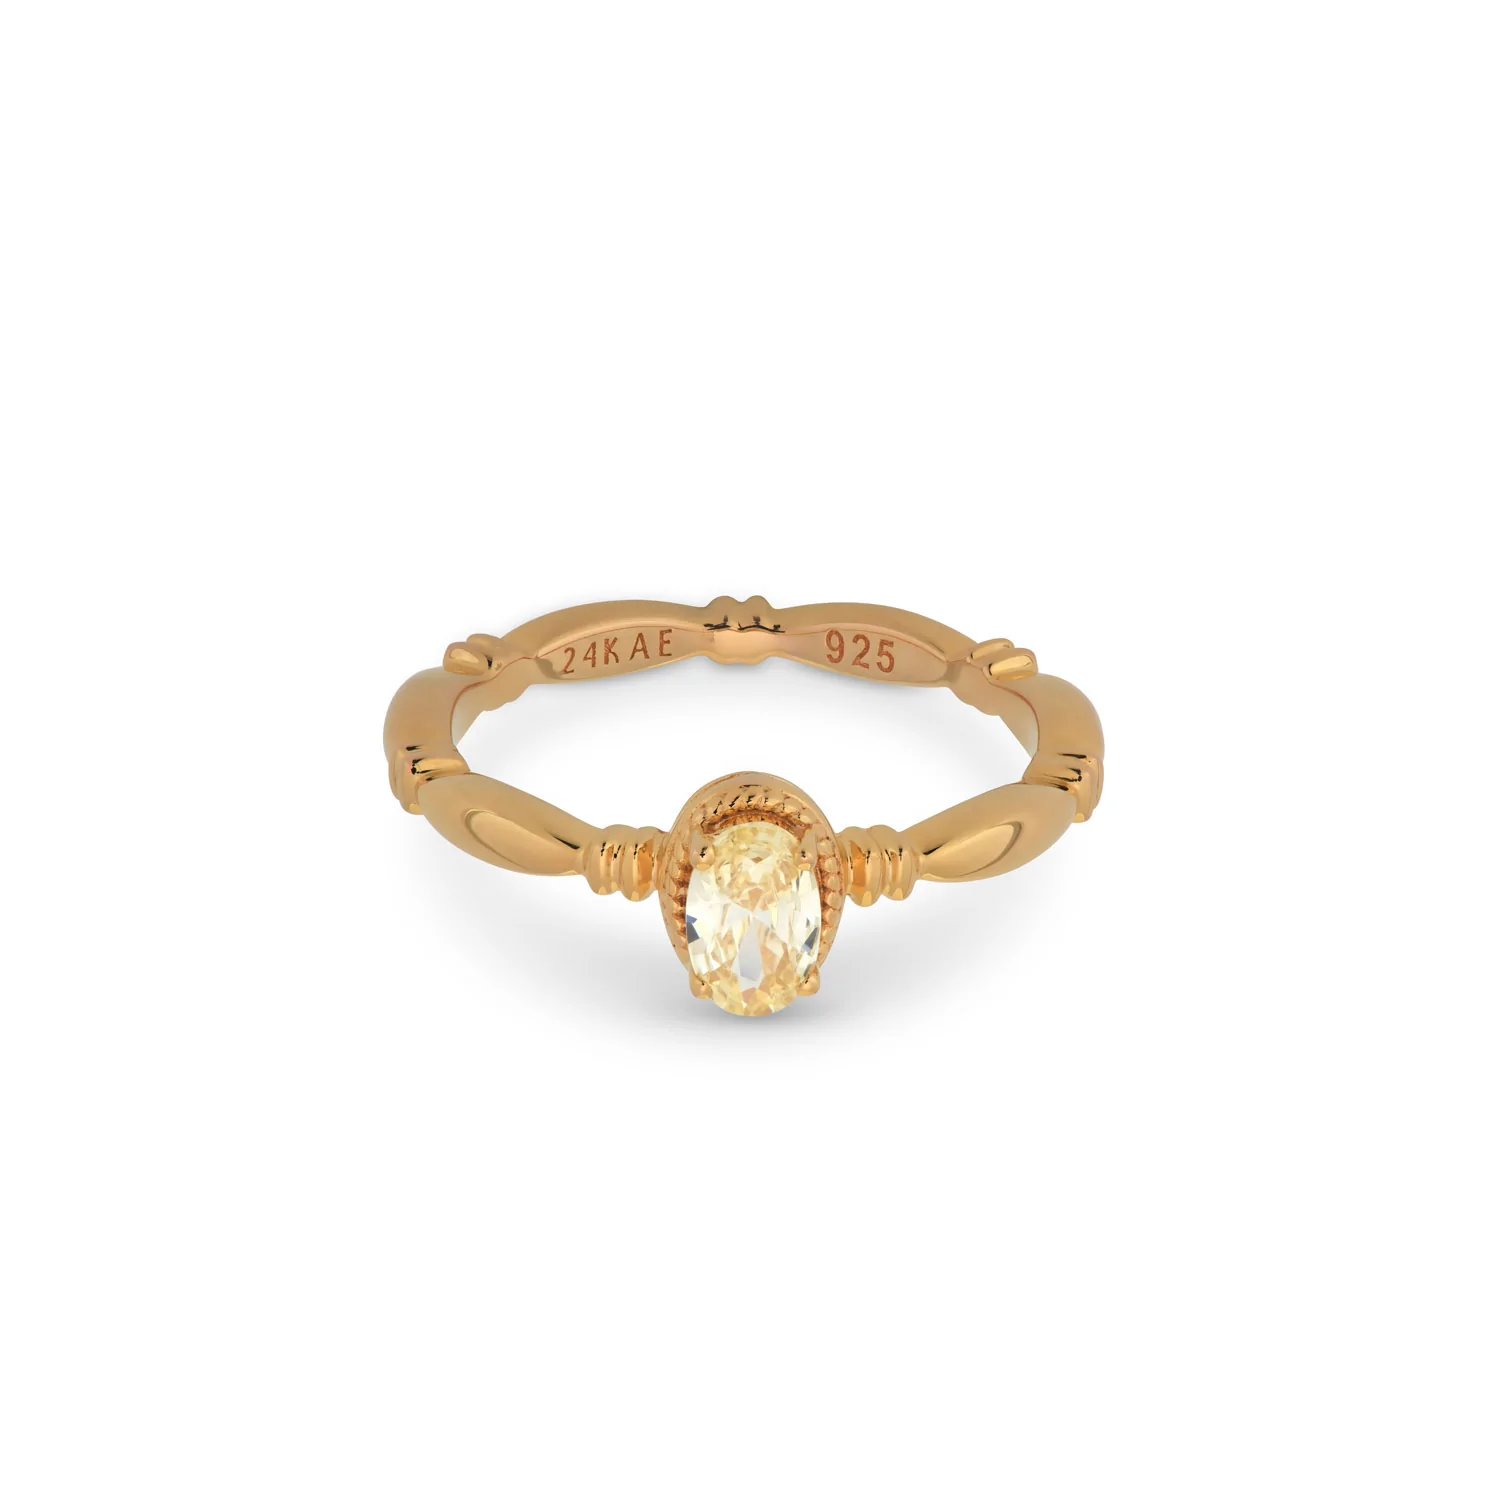 24Kae Gold Ring with Oval Beige Stone